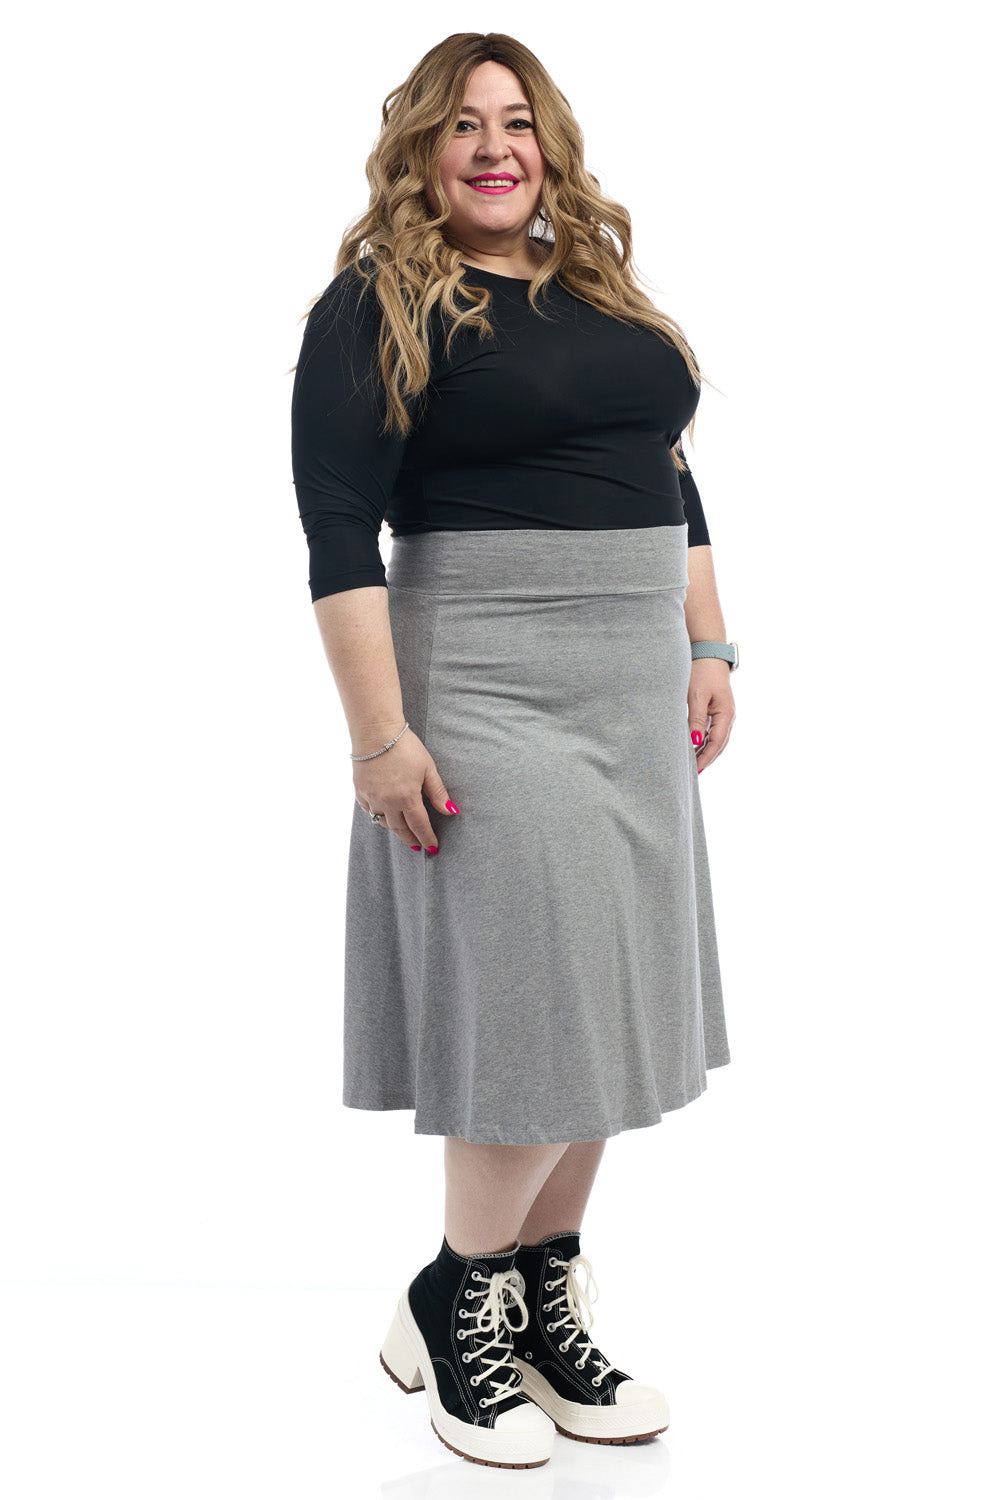 27 inch plus size heather grey a-line below knee length cotton skater skirt